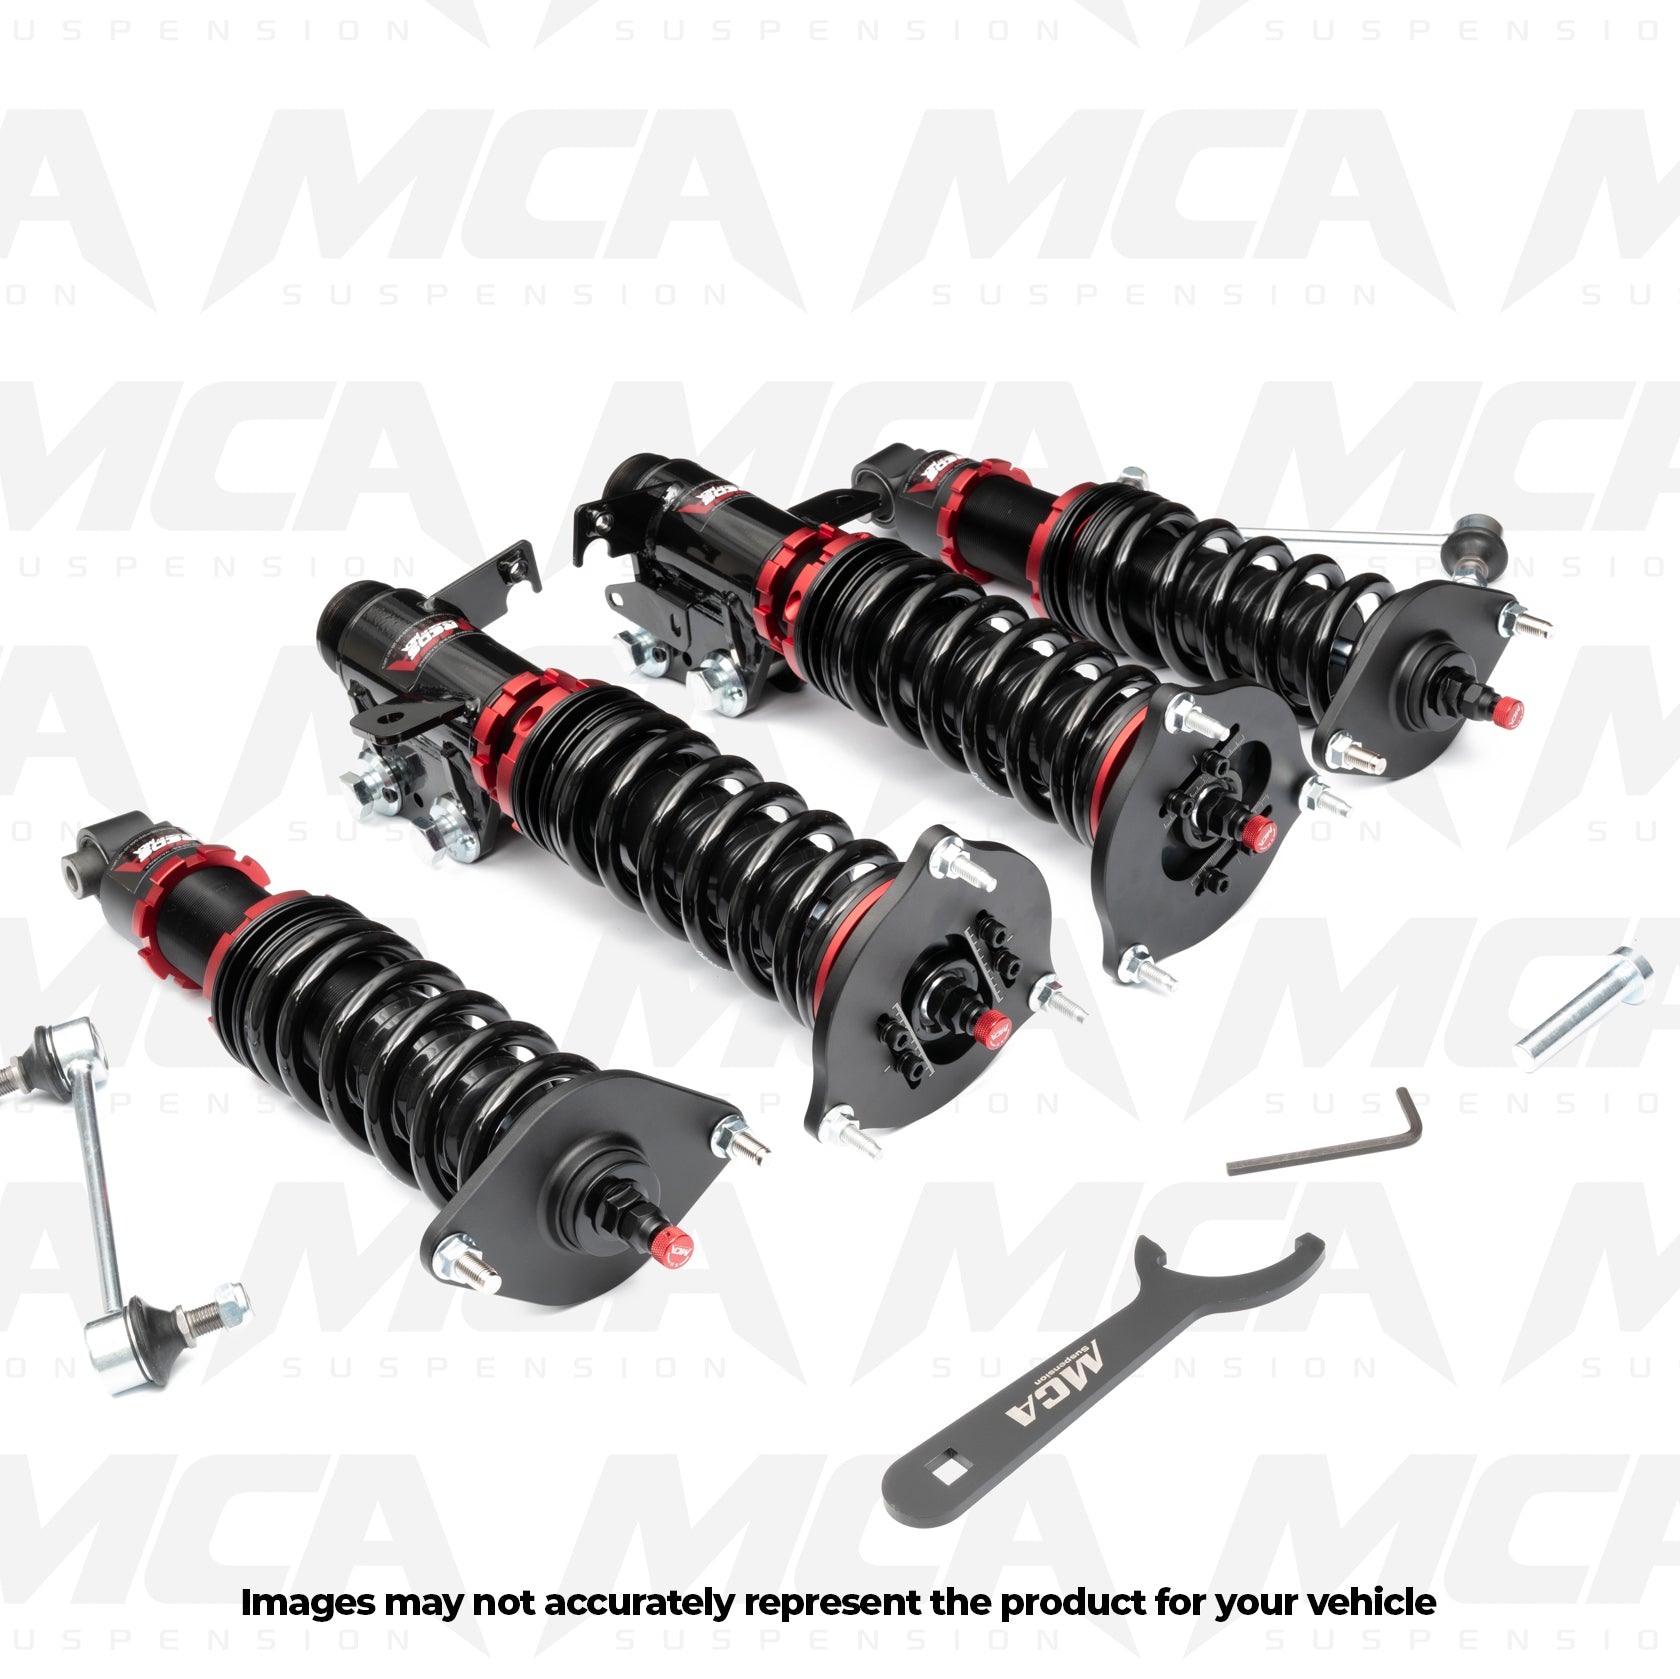 MCA Reds High performance coilover suspension for track day and race use